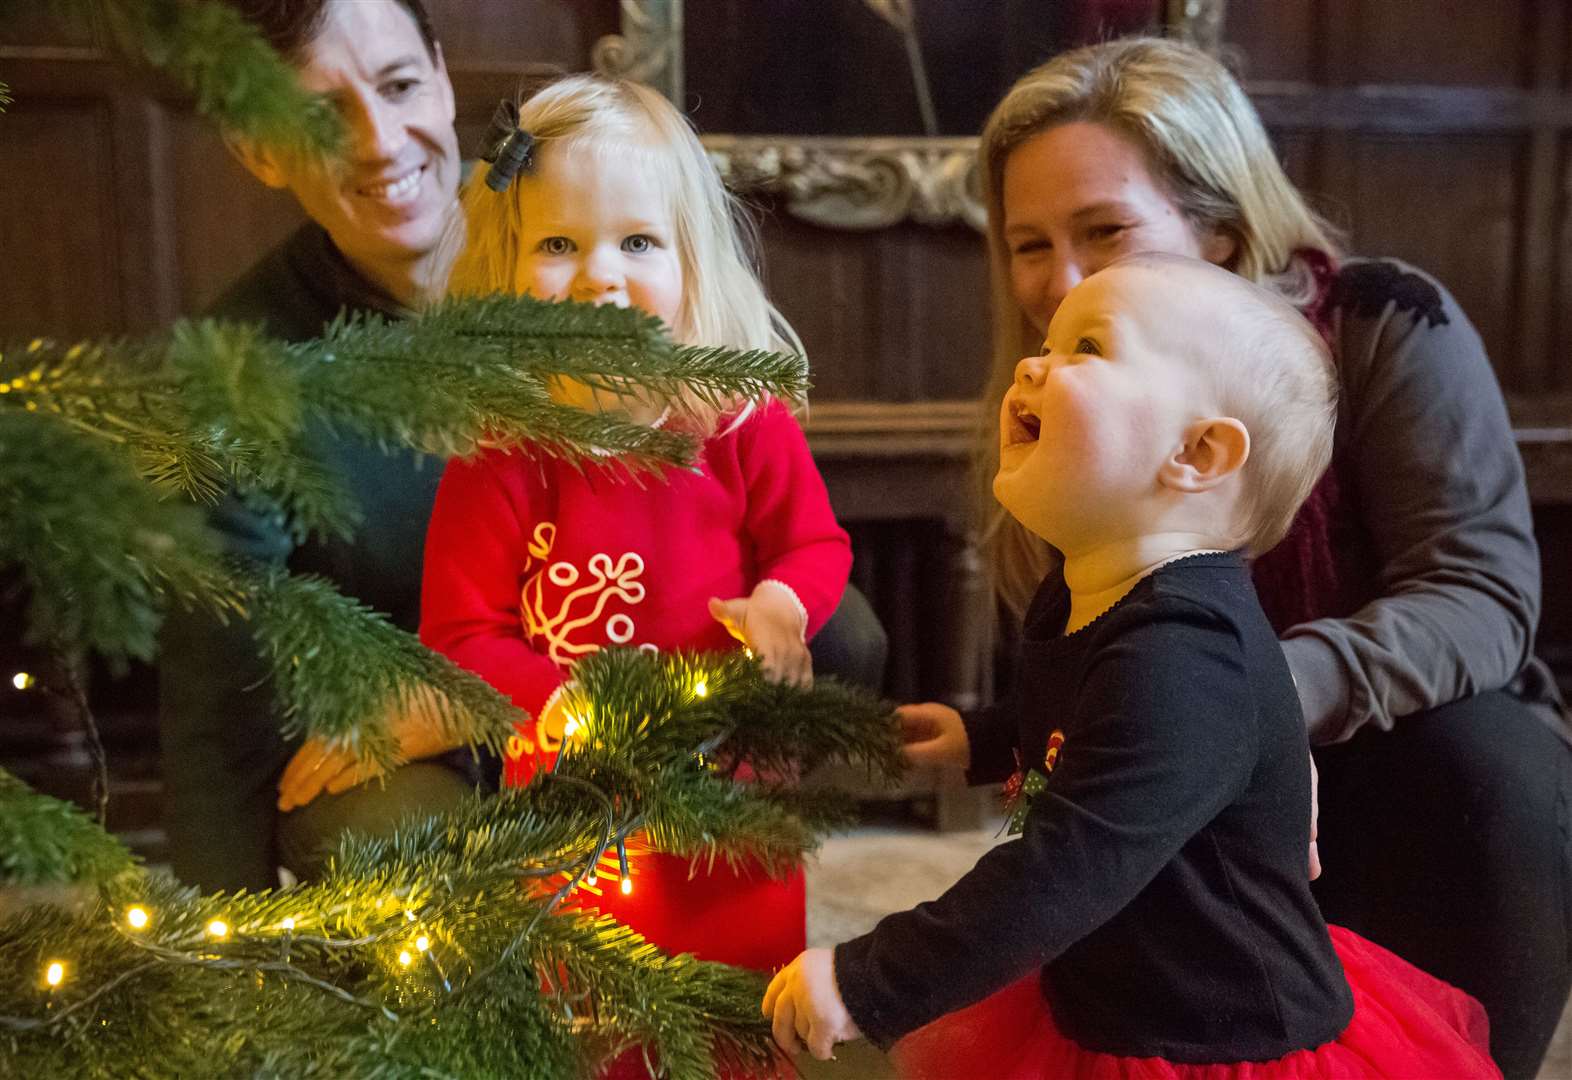 Decorating the tree at home is often a fun family activity. Stock picture: National Trust/James Dobson